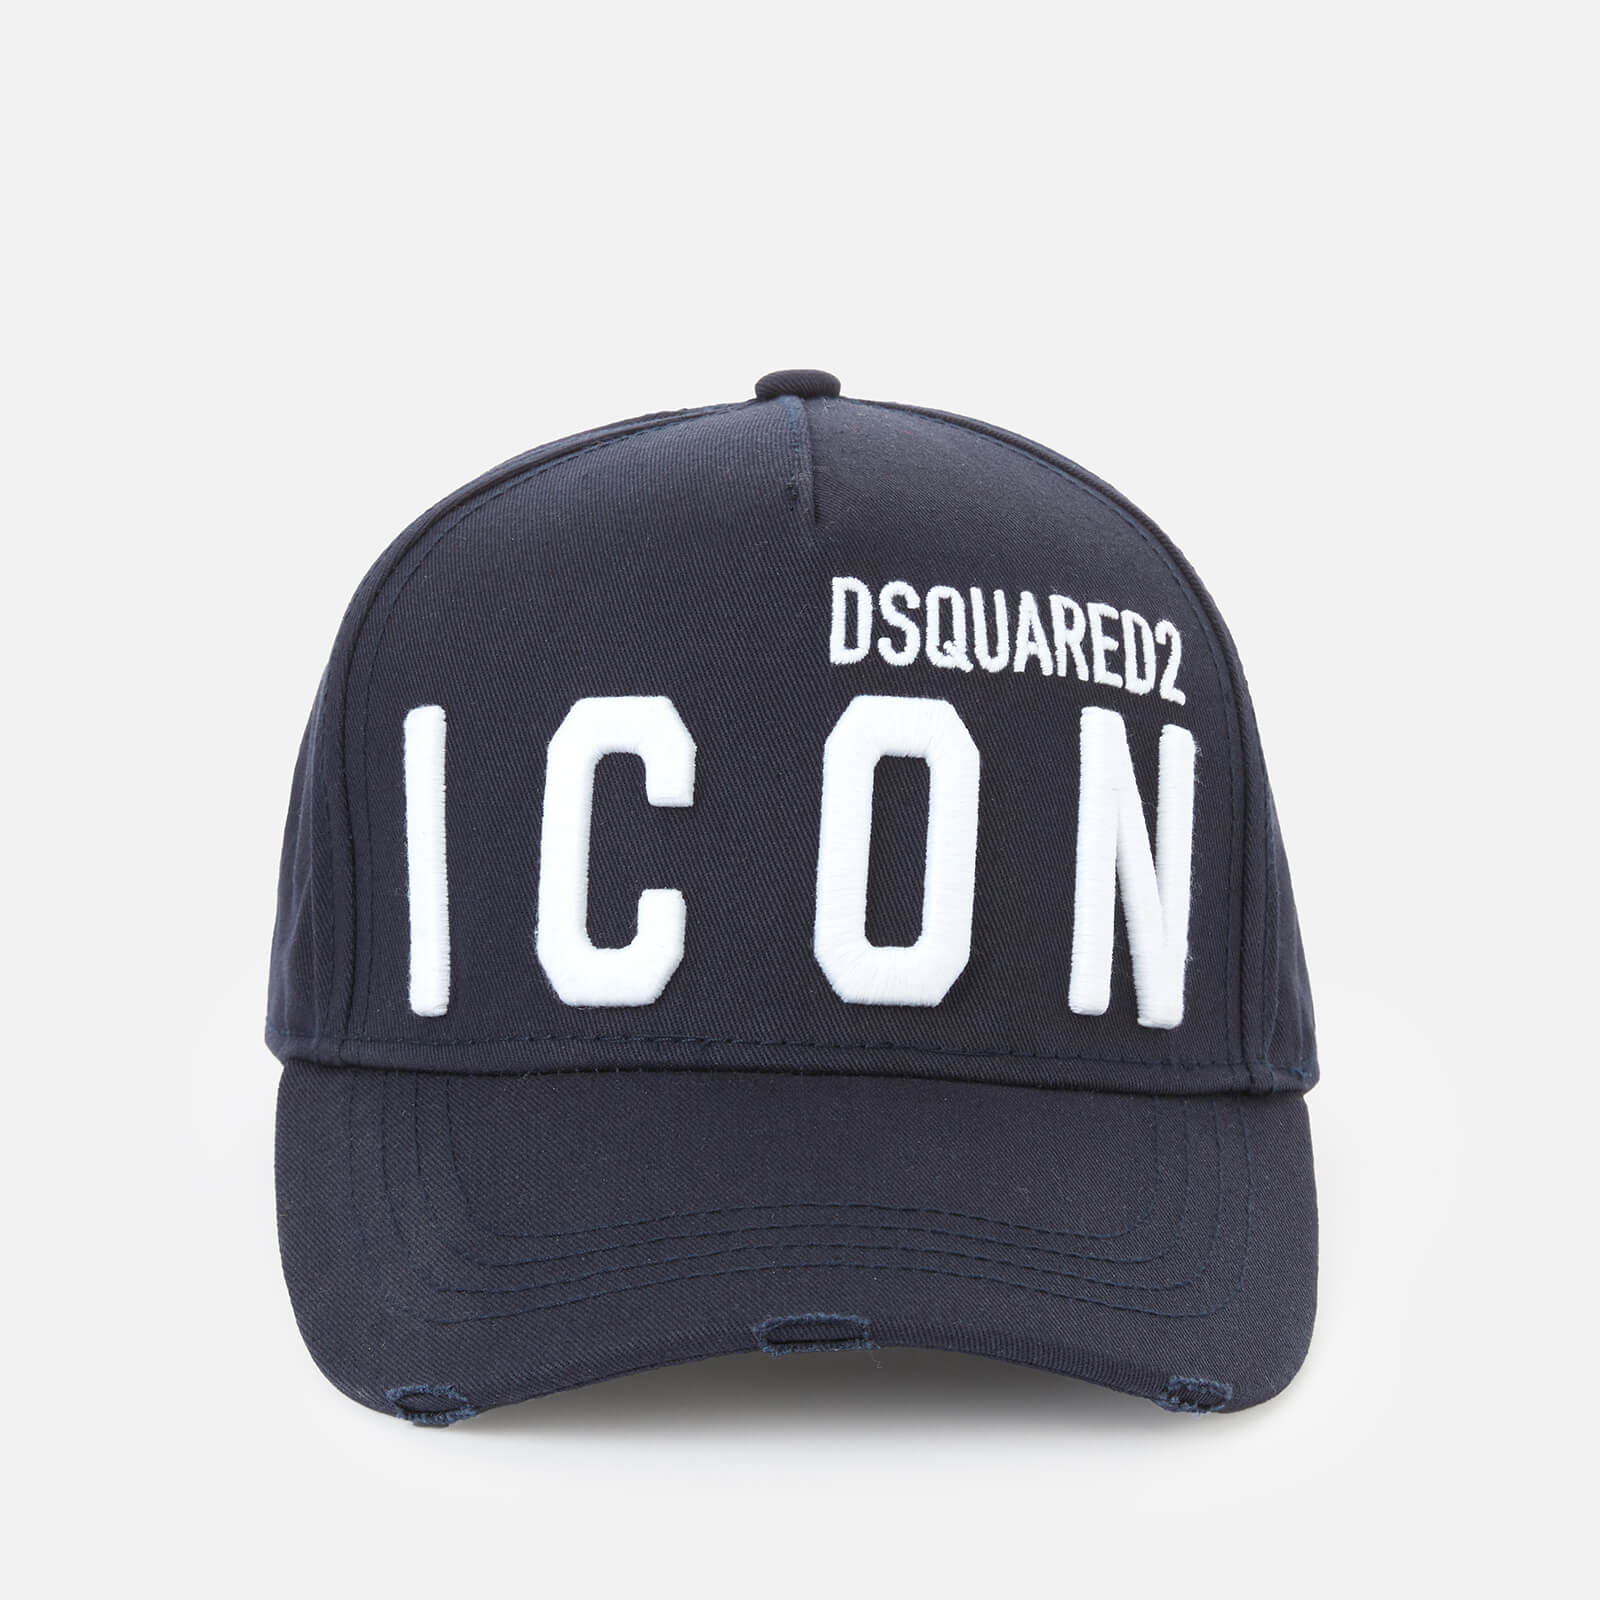 Dsquared2 Men's D2 Icon Embroidered Cap - Navy/White